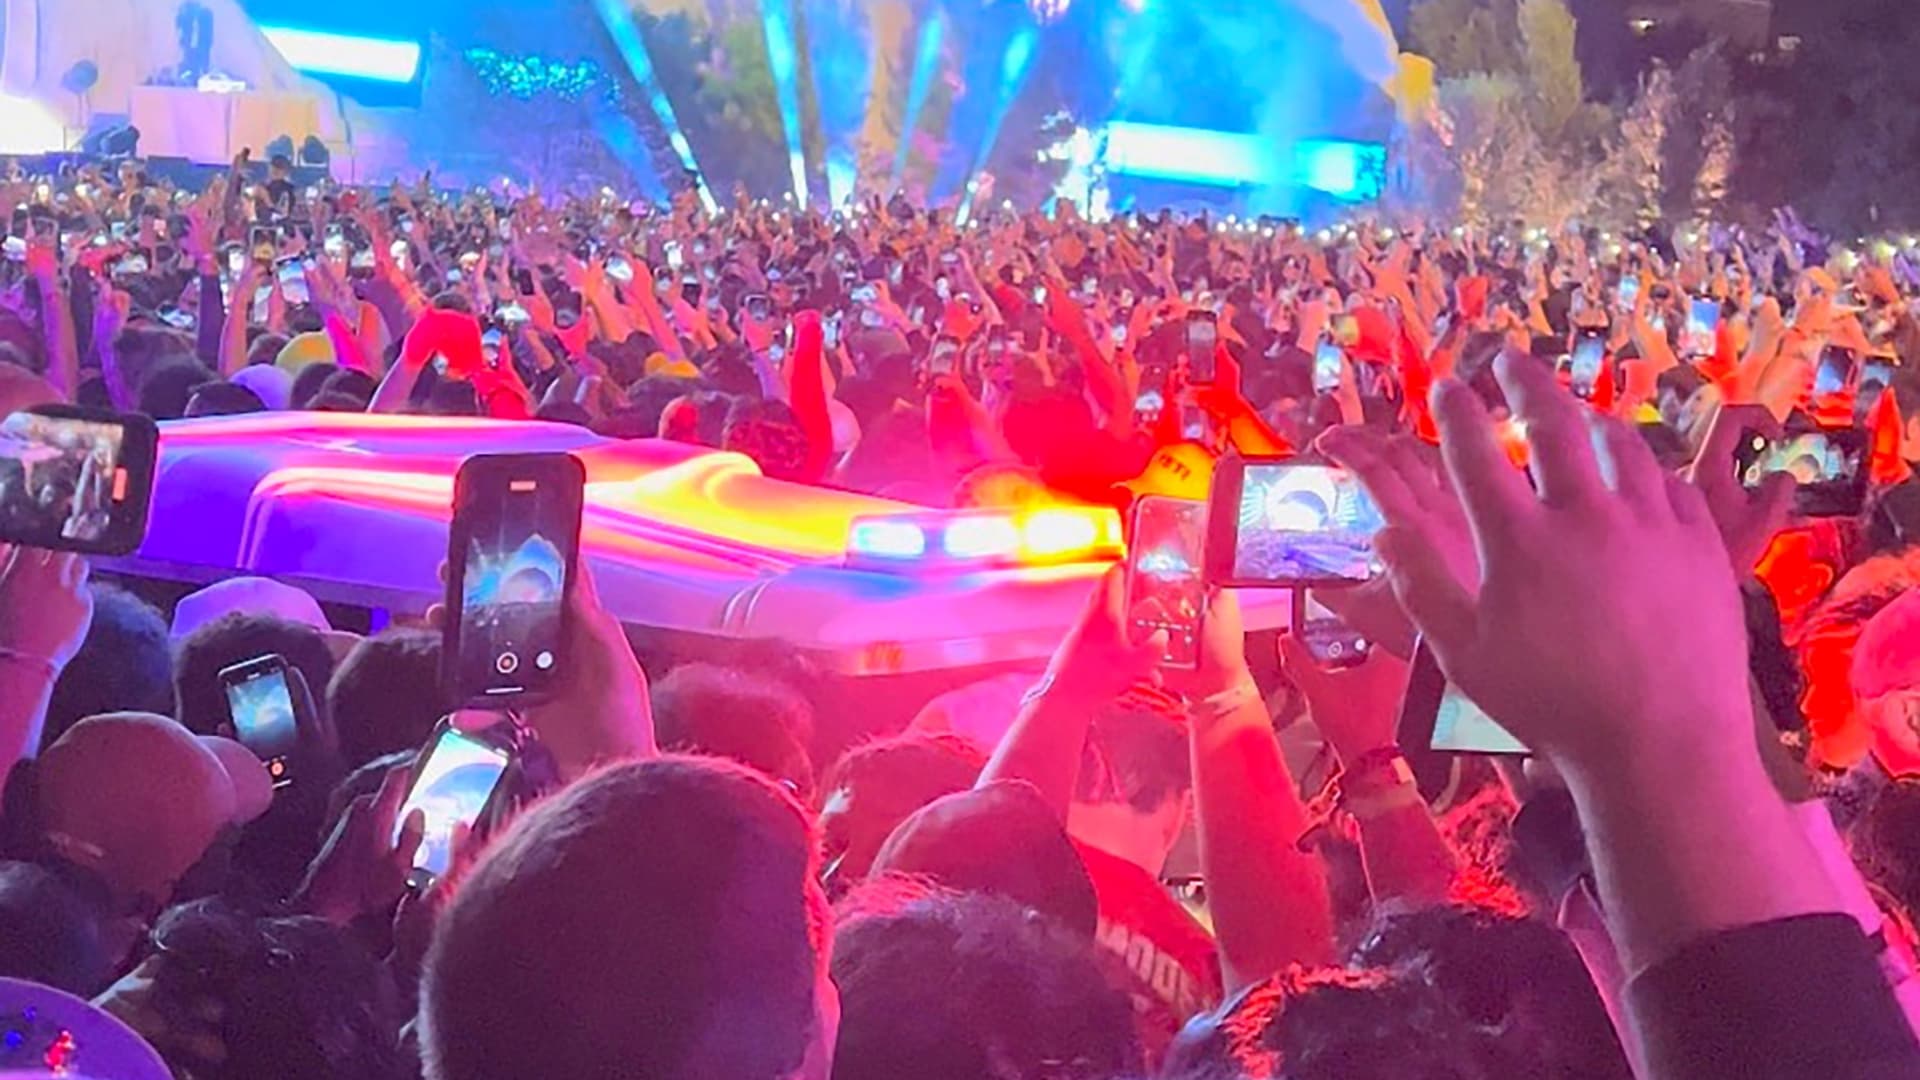 An ambulance is seen in the crowd during the Astroworld music festiwal in Houston, Texas, U.S., November 5, 2021 in this still image obtained from a social media video on November 6, 2021.